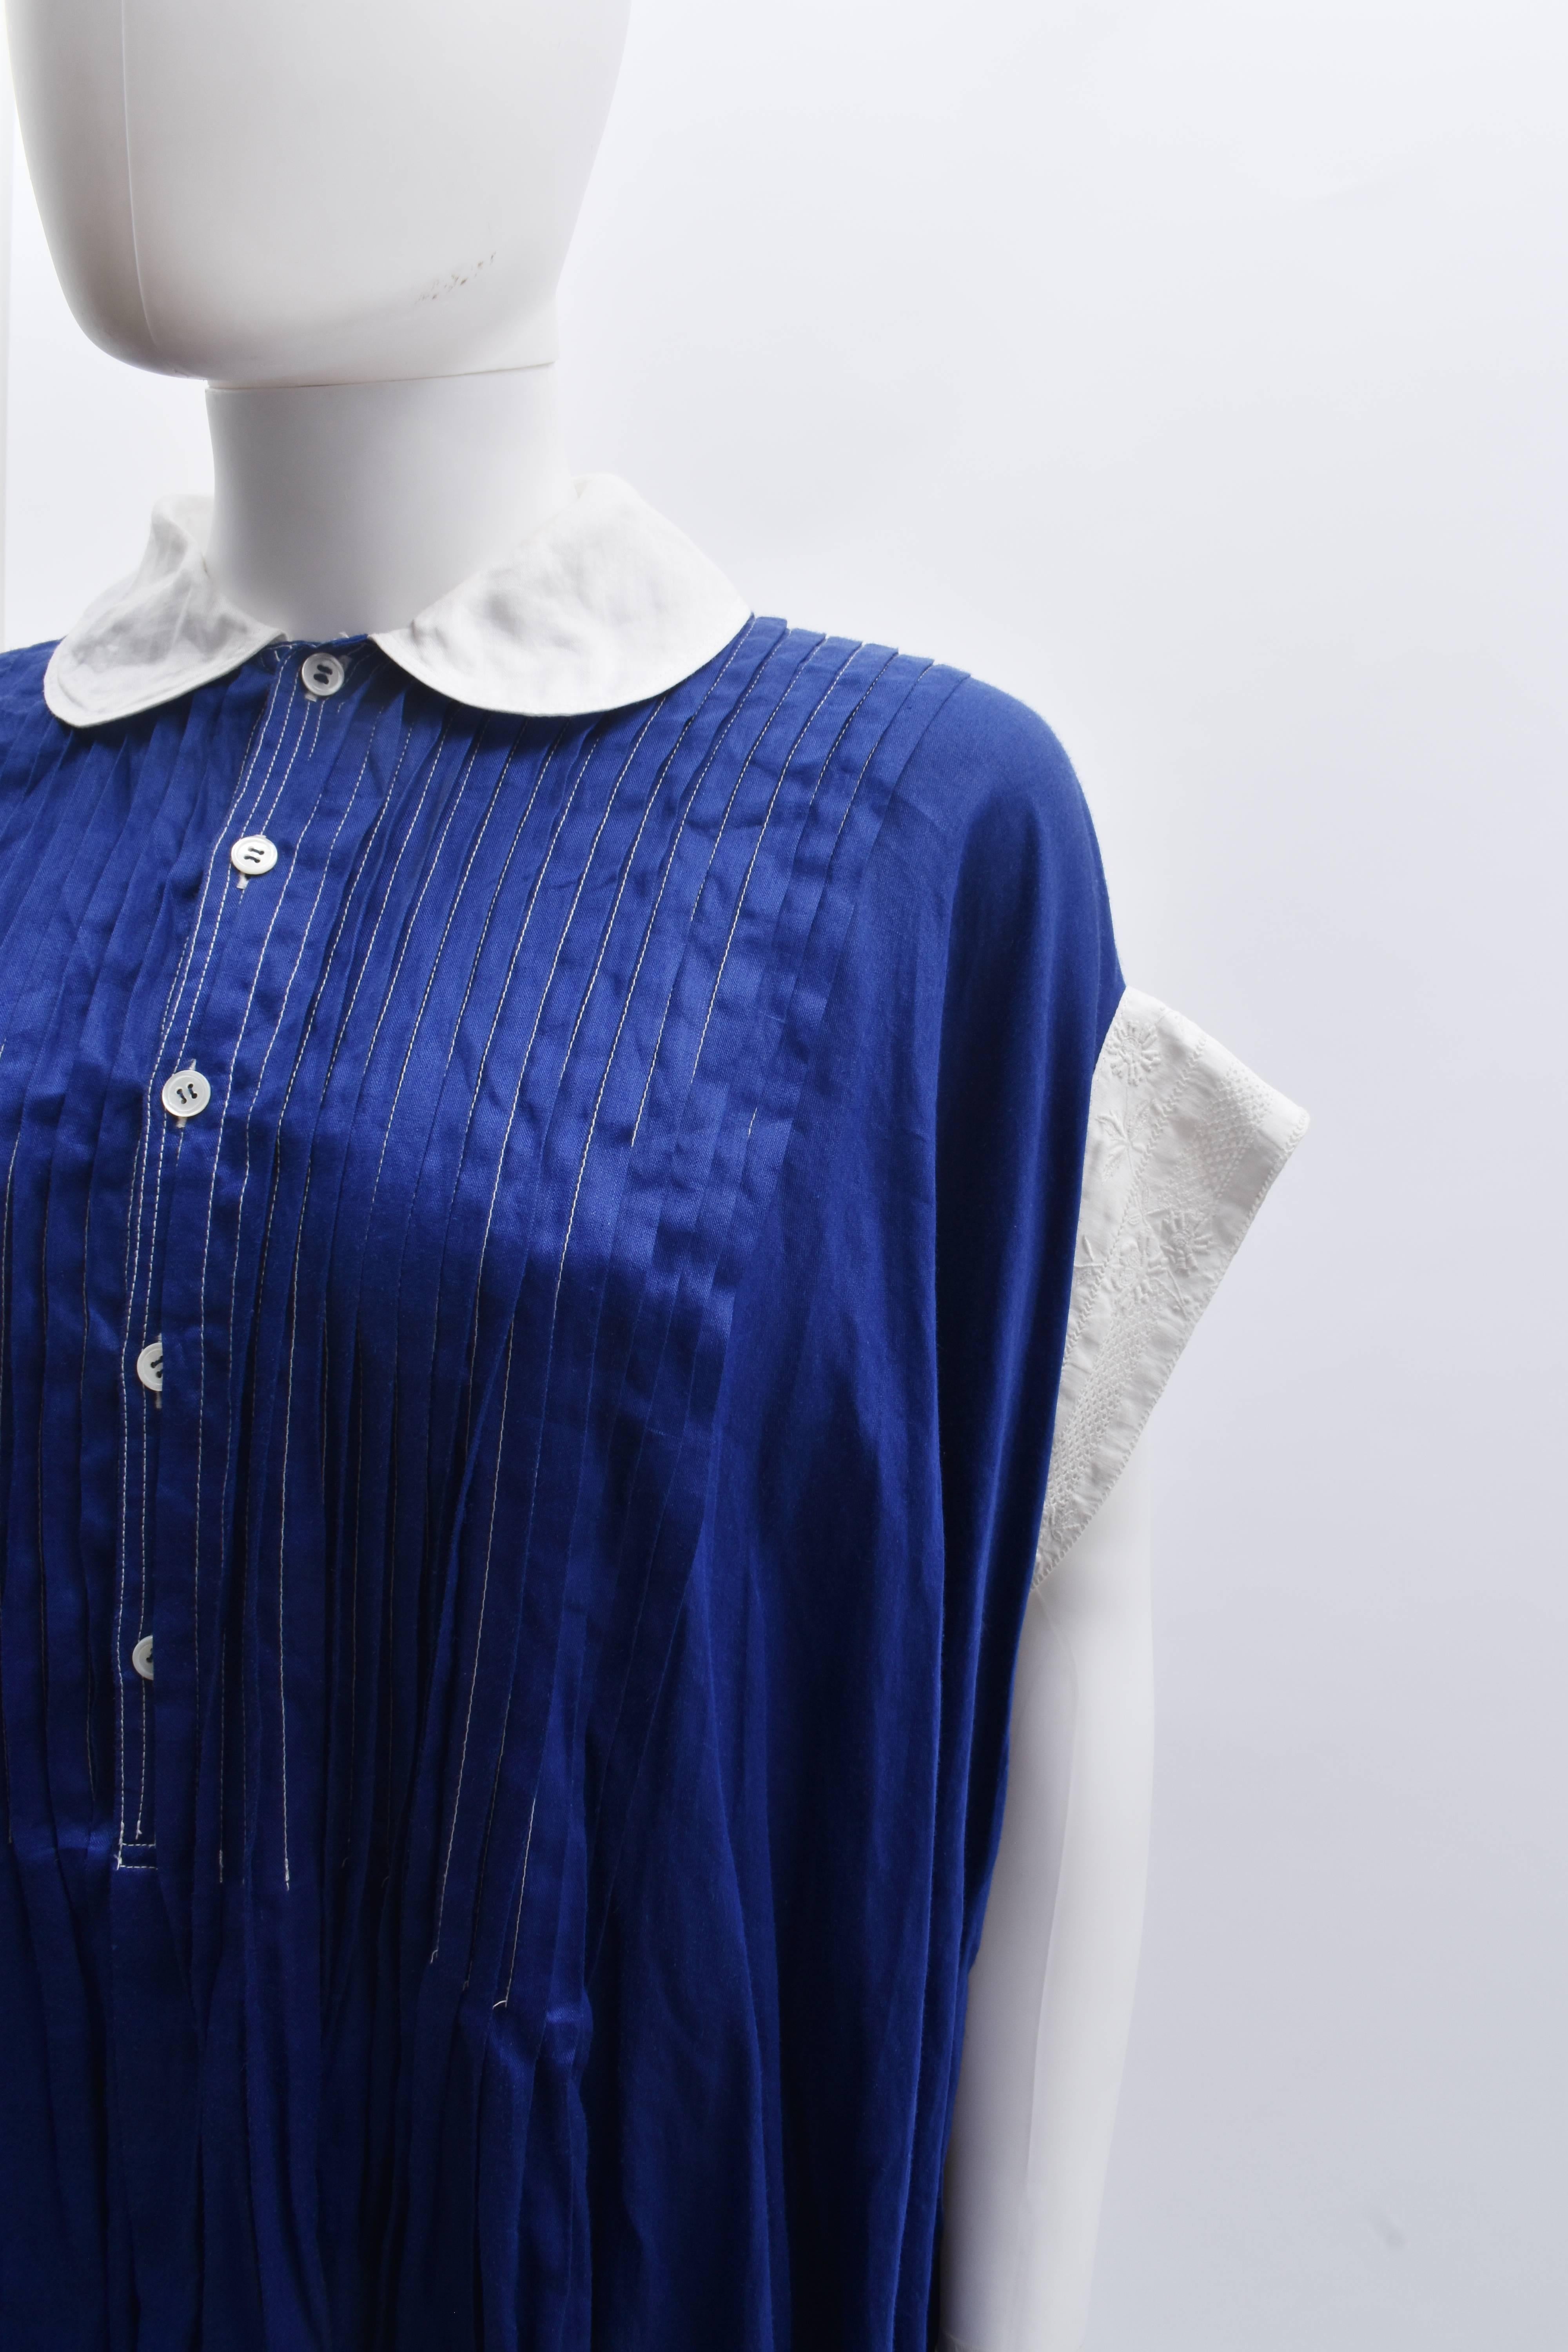 Junya Watanabe Blue Linen Shirt Dress with White Collar and Contrast Stitching S 1